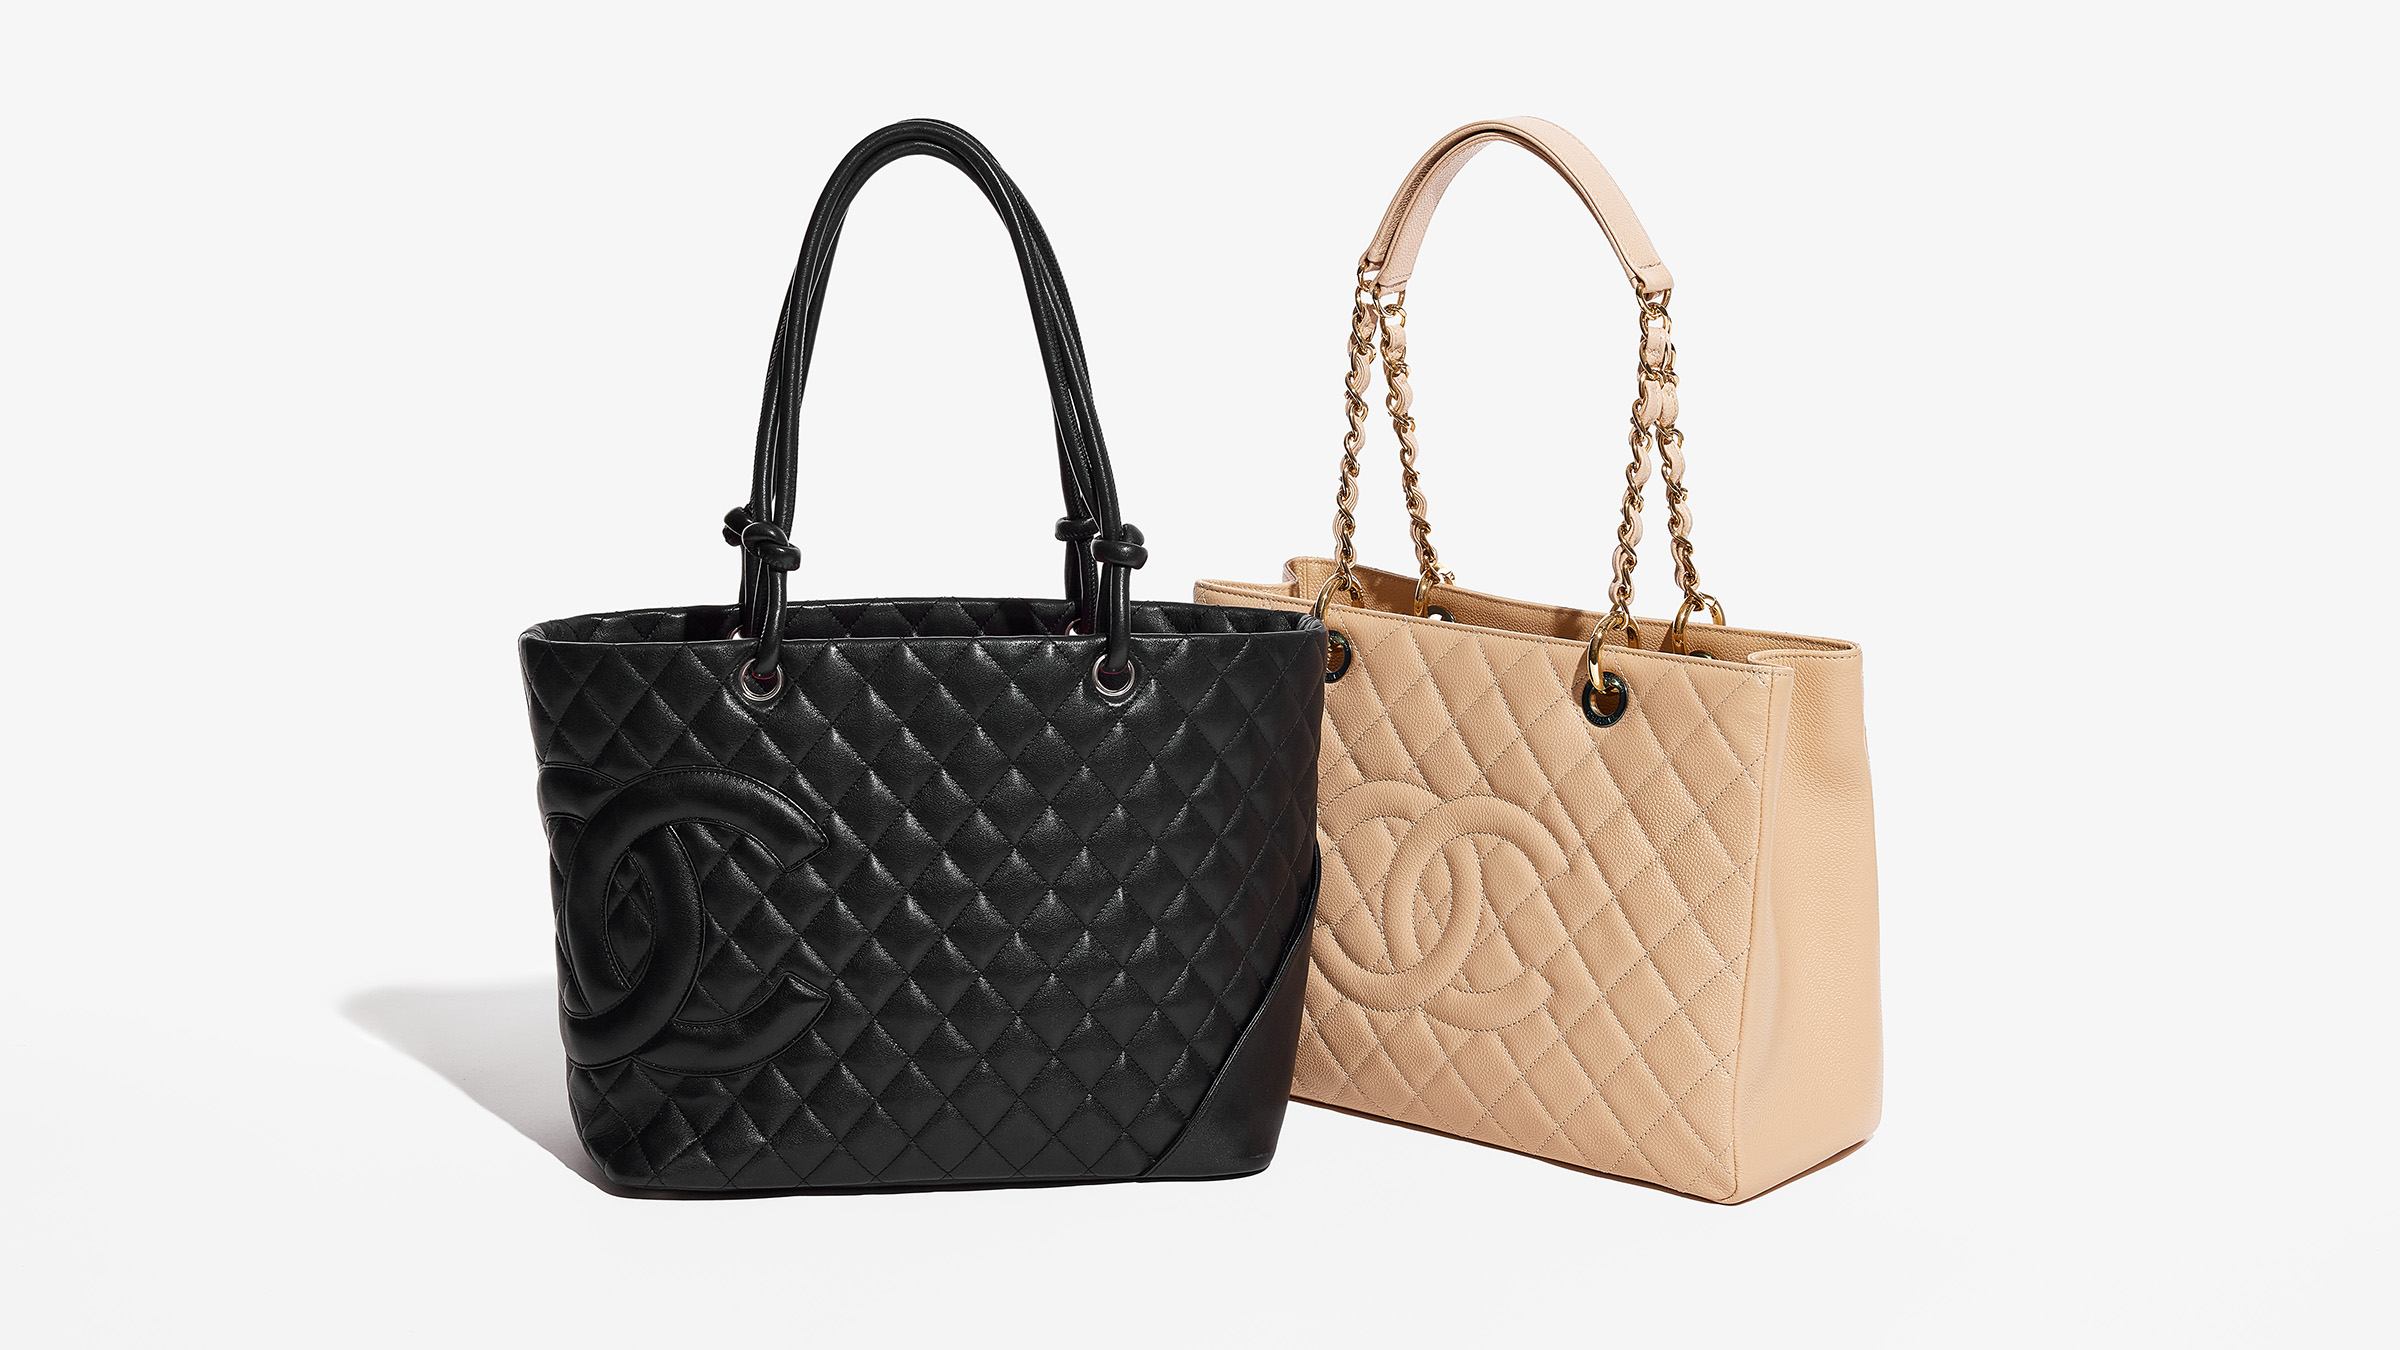 Discontinued Chanel Bags: A Collector's Guide - Academy by FASHIONPHILE